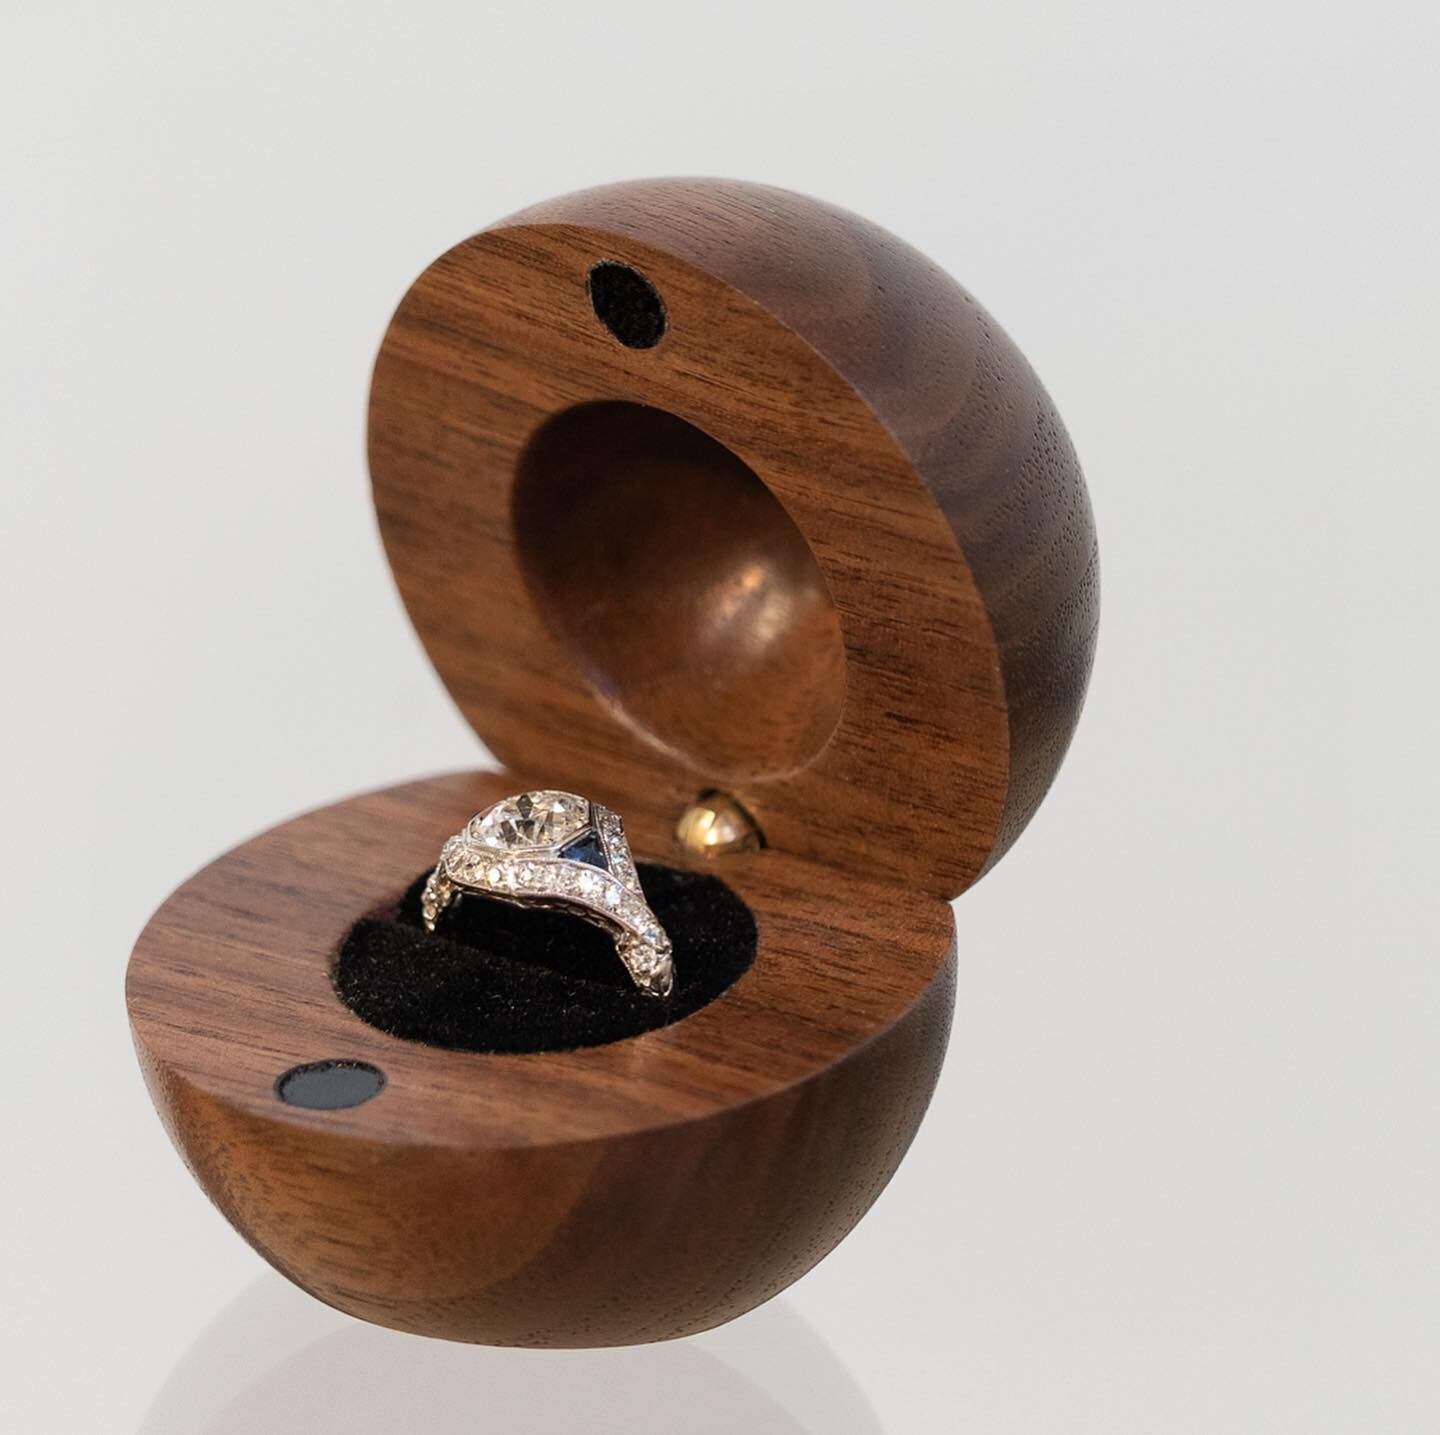 This was an unexpected and unconventional request, but we made it happen.

A friend of mine wanted a spherical ring case for his proposal out of a solid piece of walnut. This was turned after being halved, with the hinge and ring slot already in plac